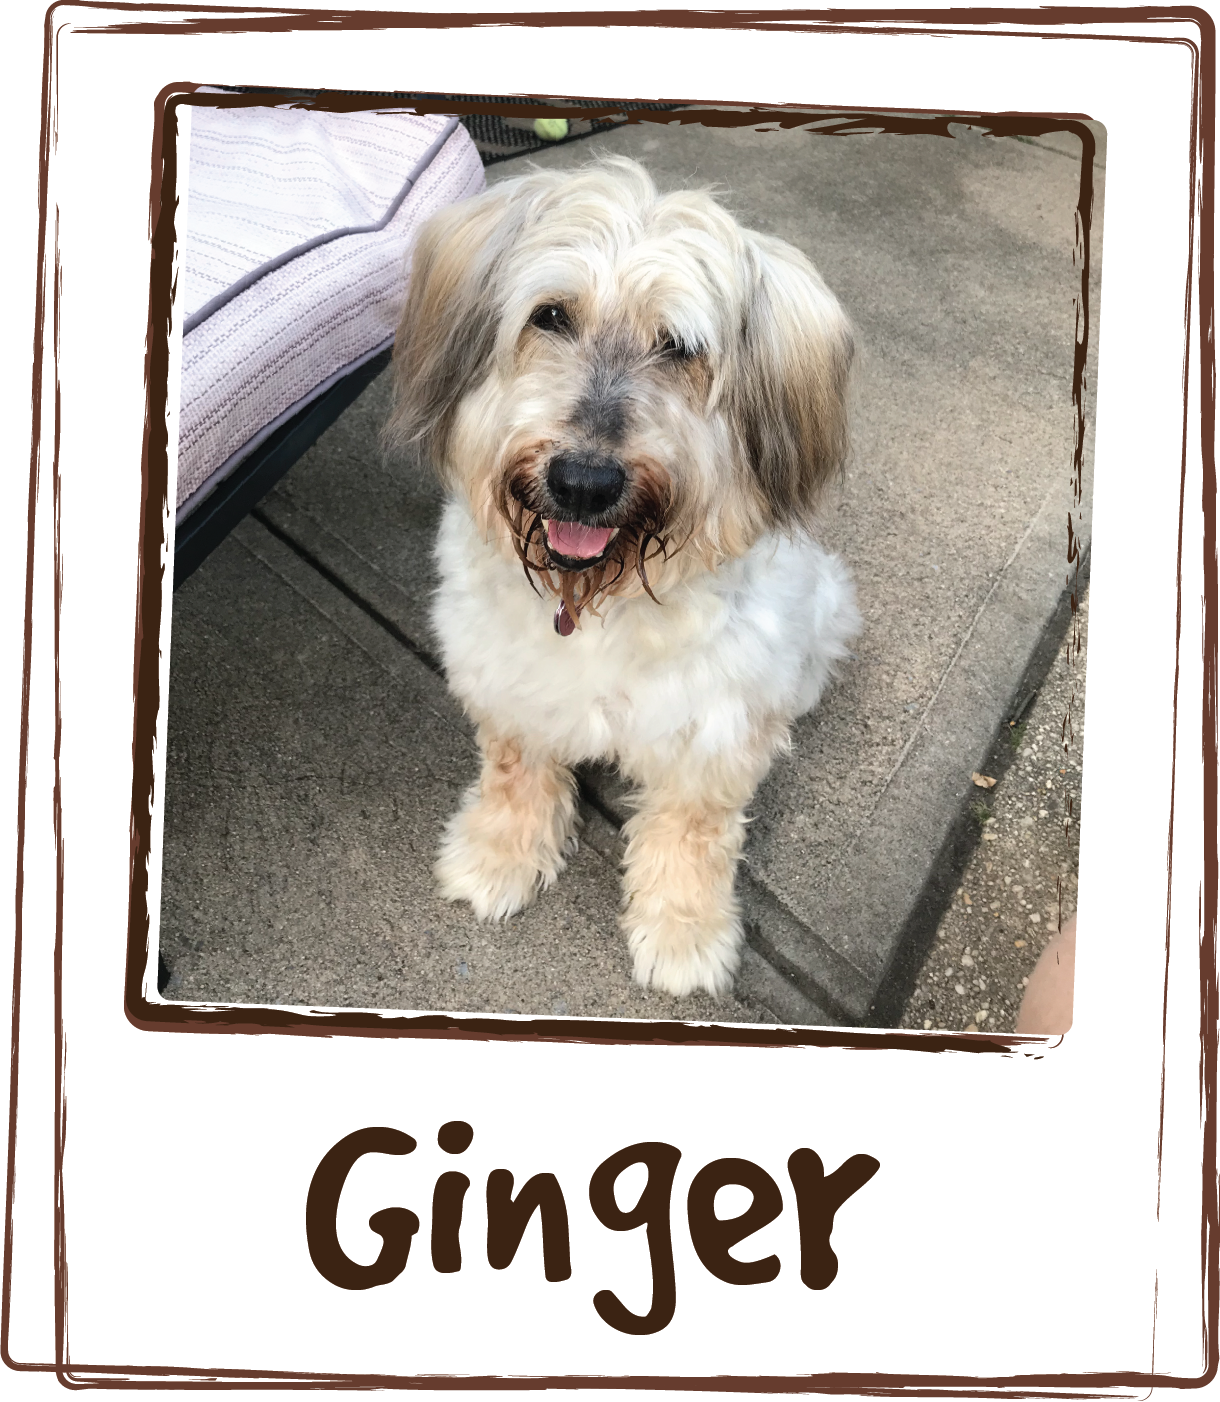  “Ginger suffered from UTI's for most of her life. She was constantly on antibiotics. It got to the point that we discussed surgery. Thankful we found the Licks Urinary Tract Care, and she has been free of UTI's for 3 years now!  Amazing Thank you Li